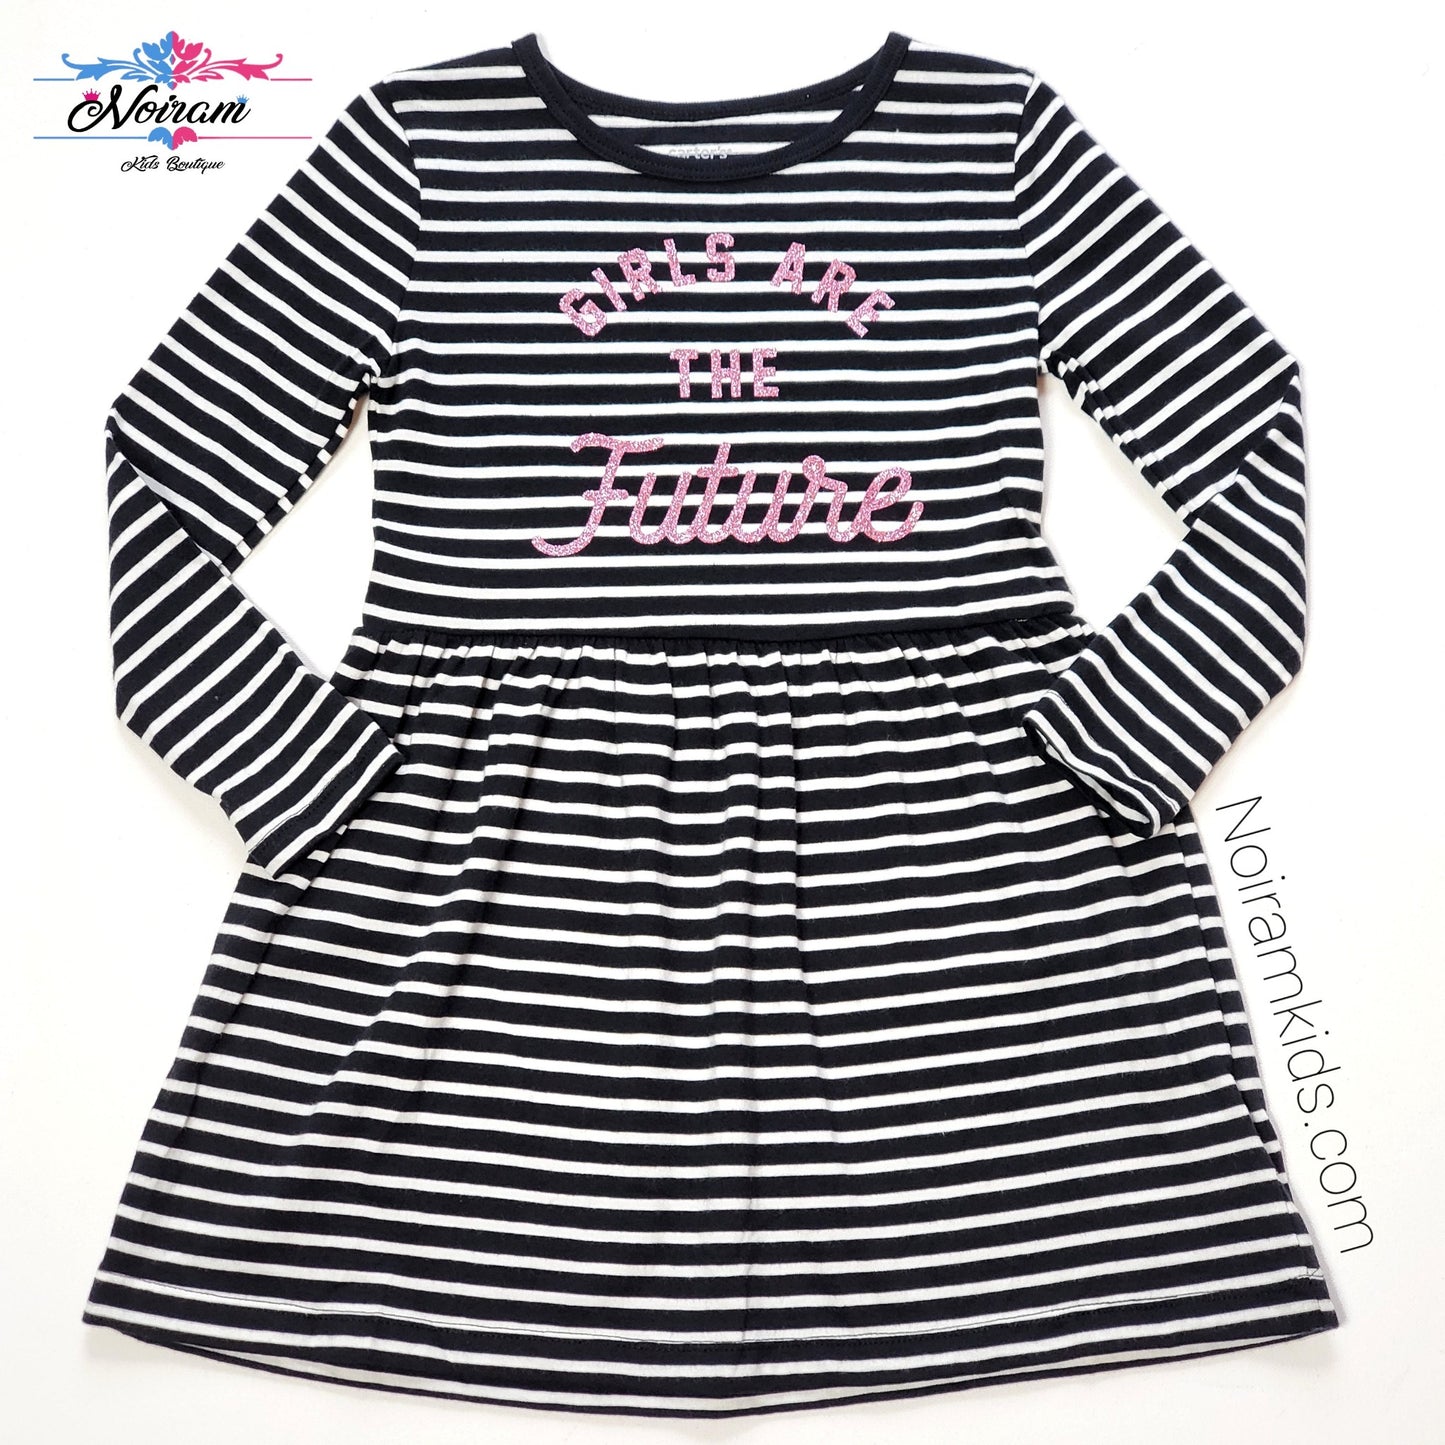 NWT Carters Girls Are the Future Dress 3T View 1